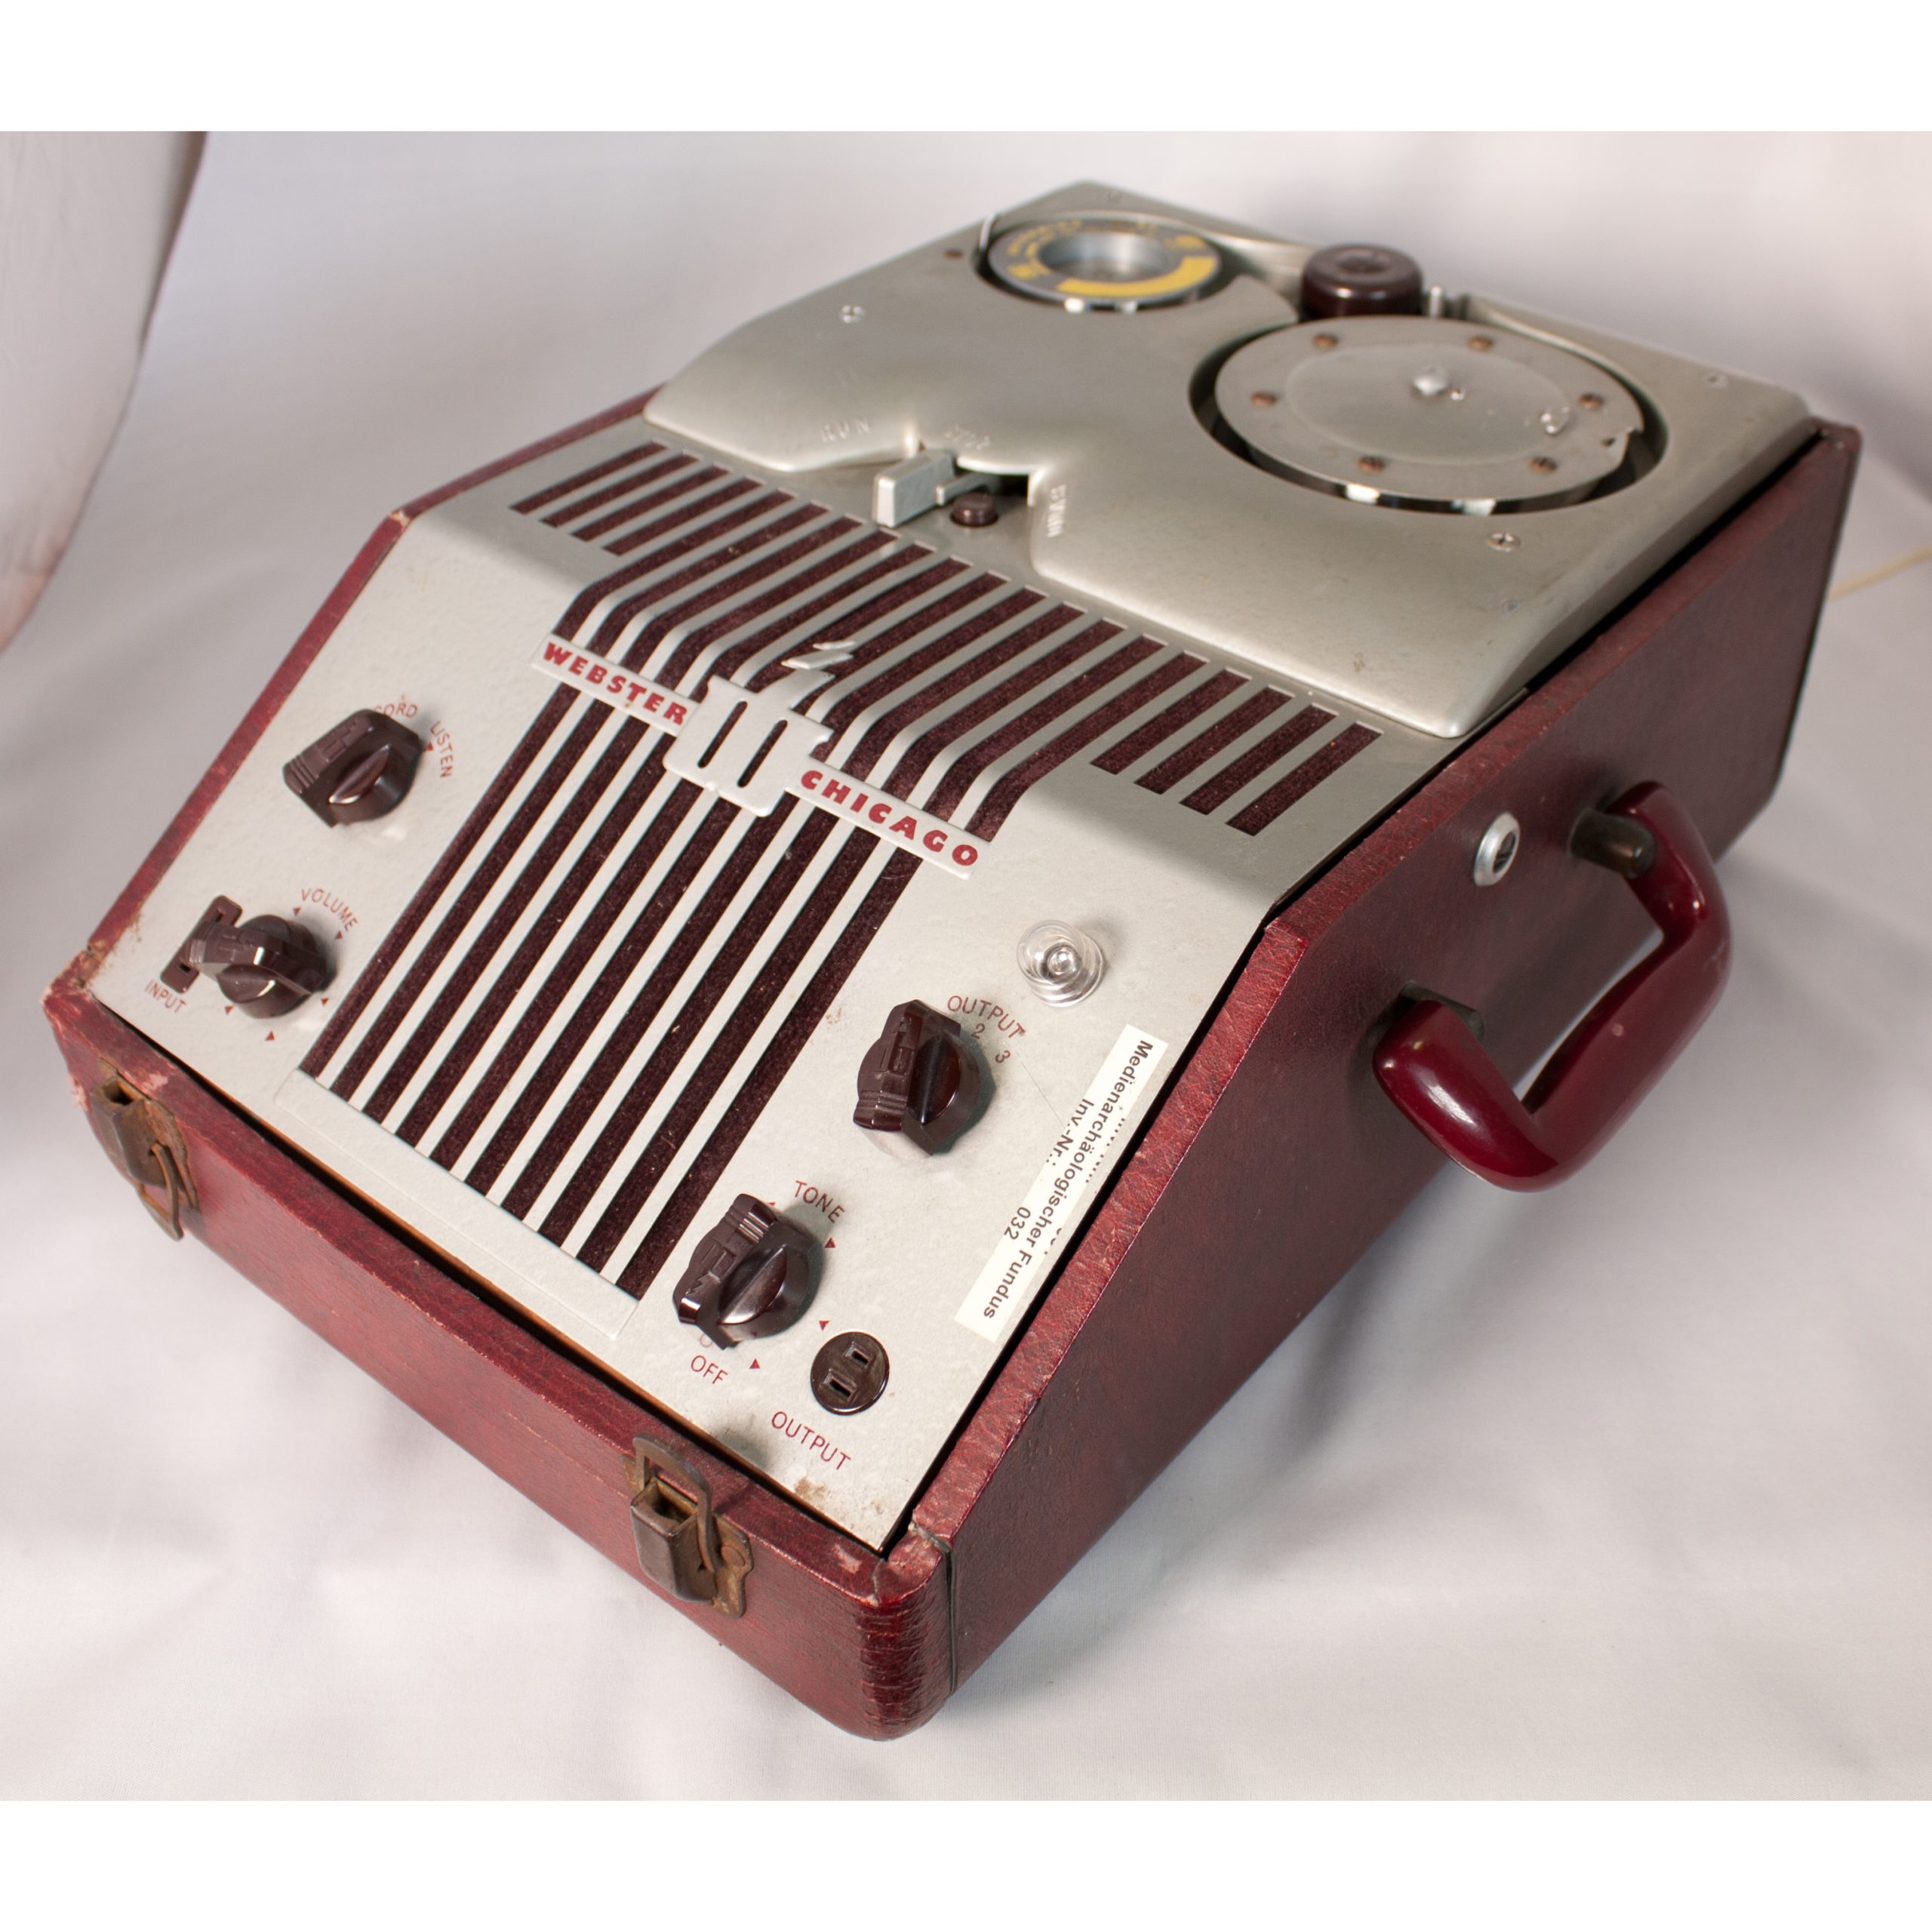 The Webster Chicago wire recorder